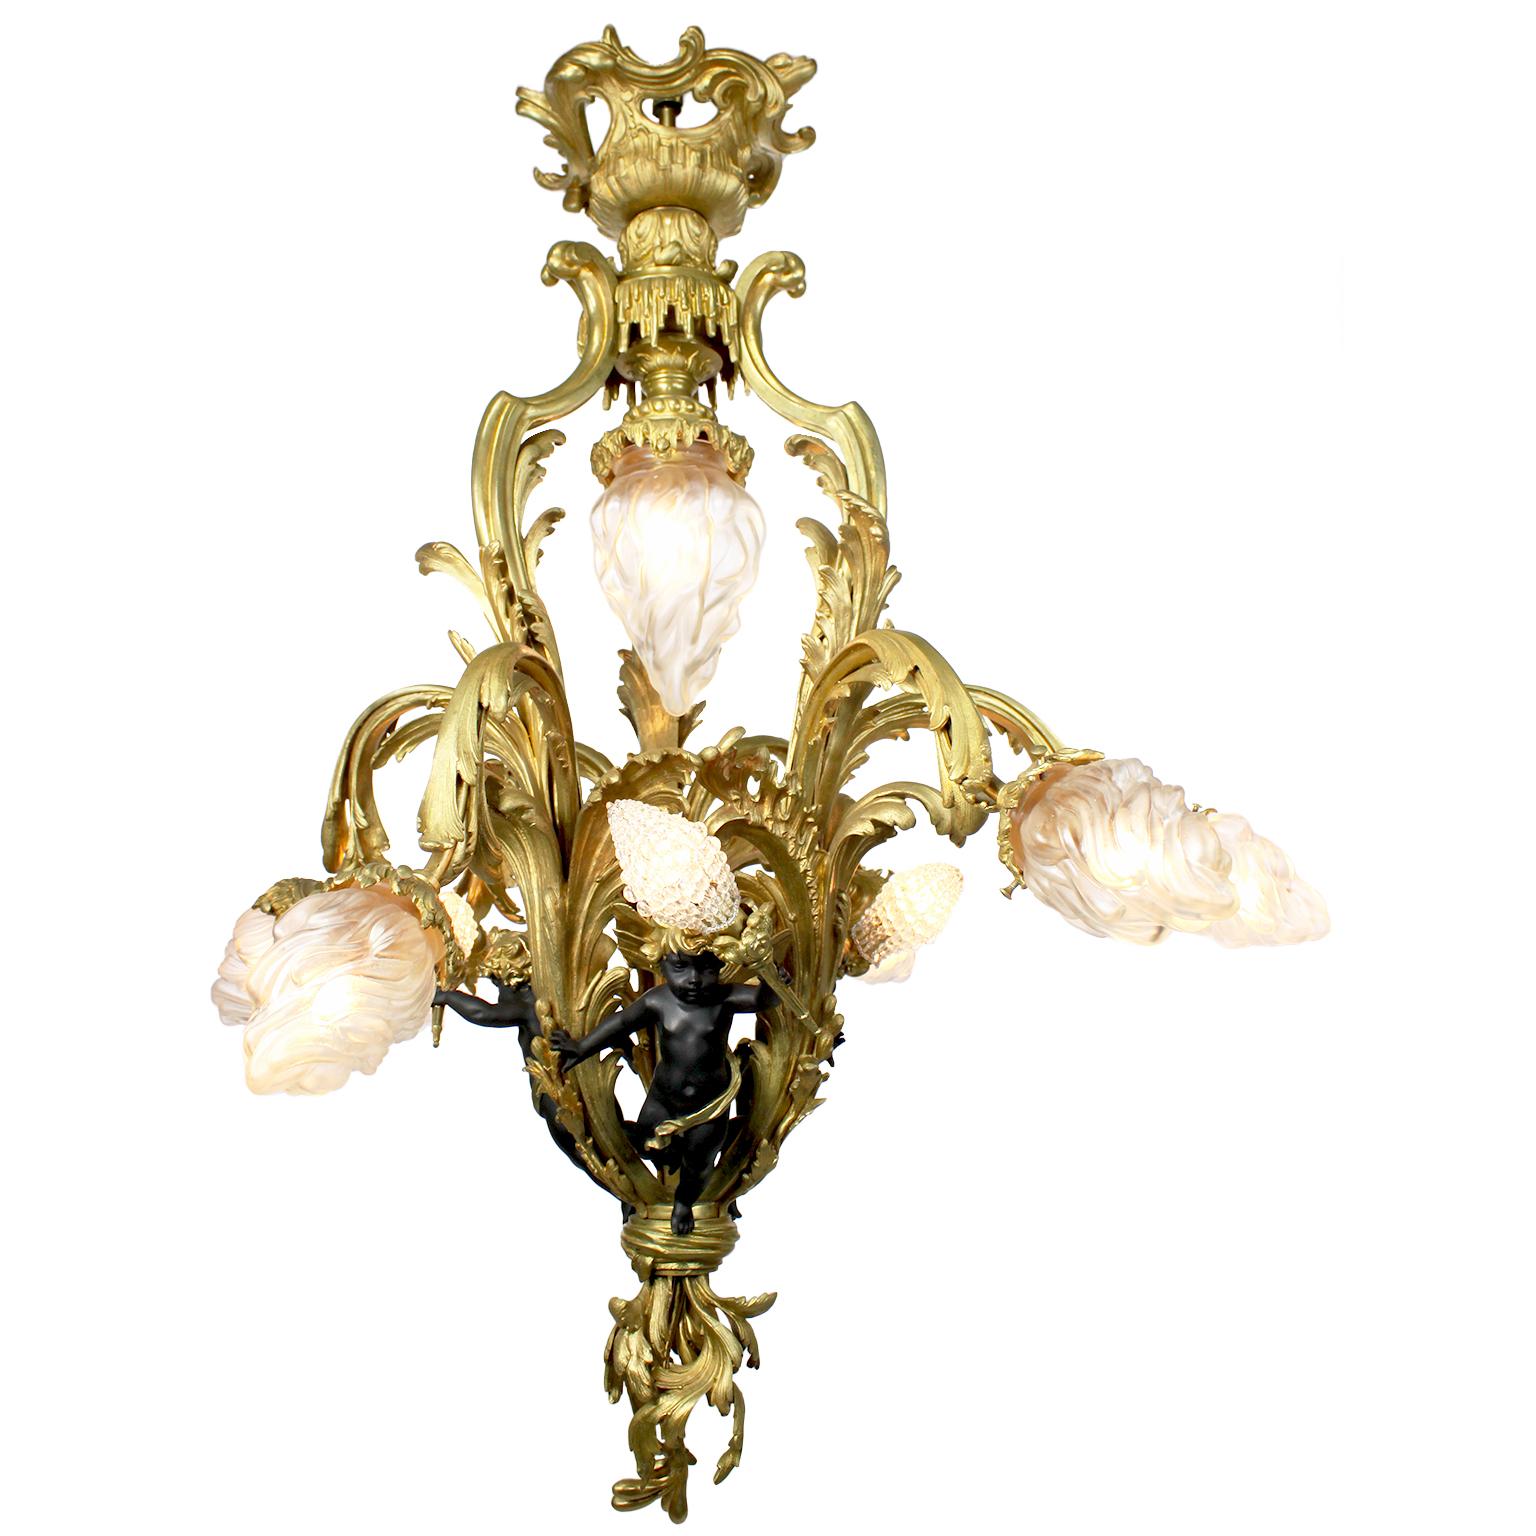 A very fine and rare French Belle Époque gilt bronze and ebonized-patinated bronze ten-light cherub chandelier, with three winged cherubs, each holding a flame light with beaded glass bulb covers, the six outer lights with frosted glass flame shades